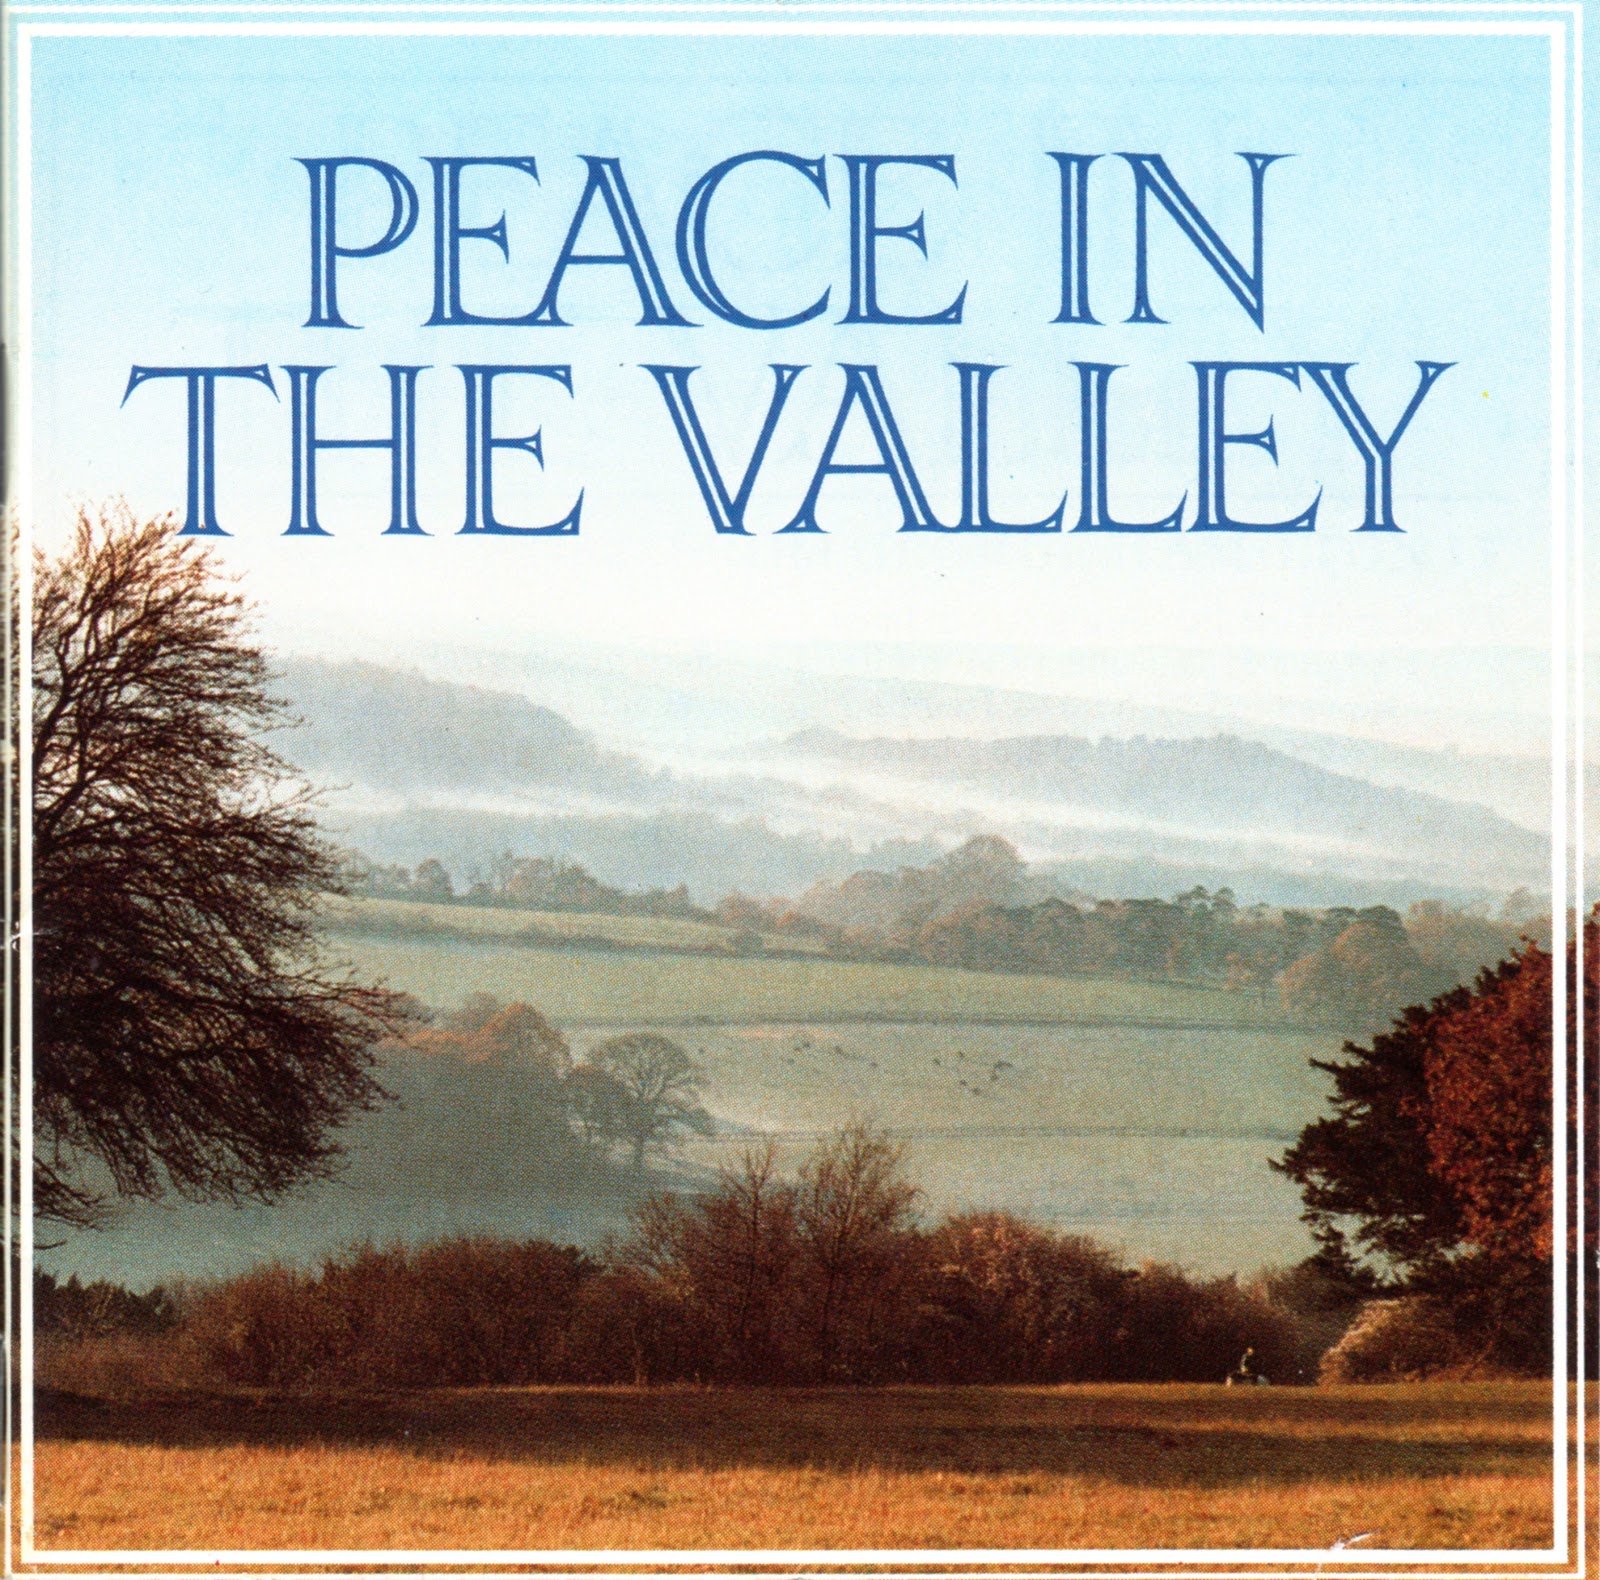 Peace in the valley by tennessee ernie ford #5